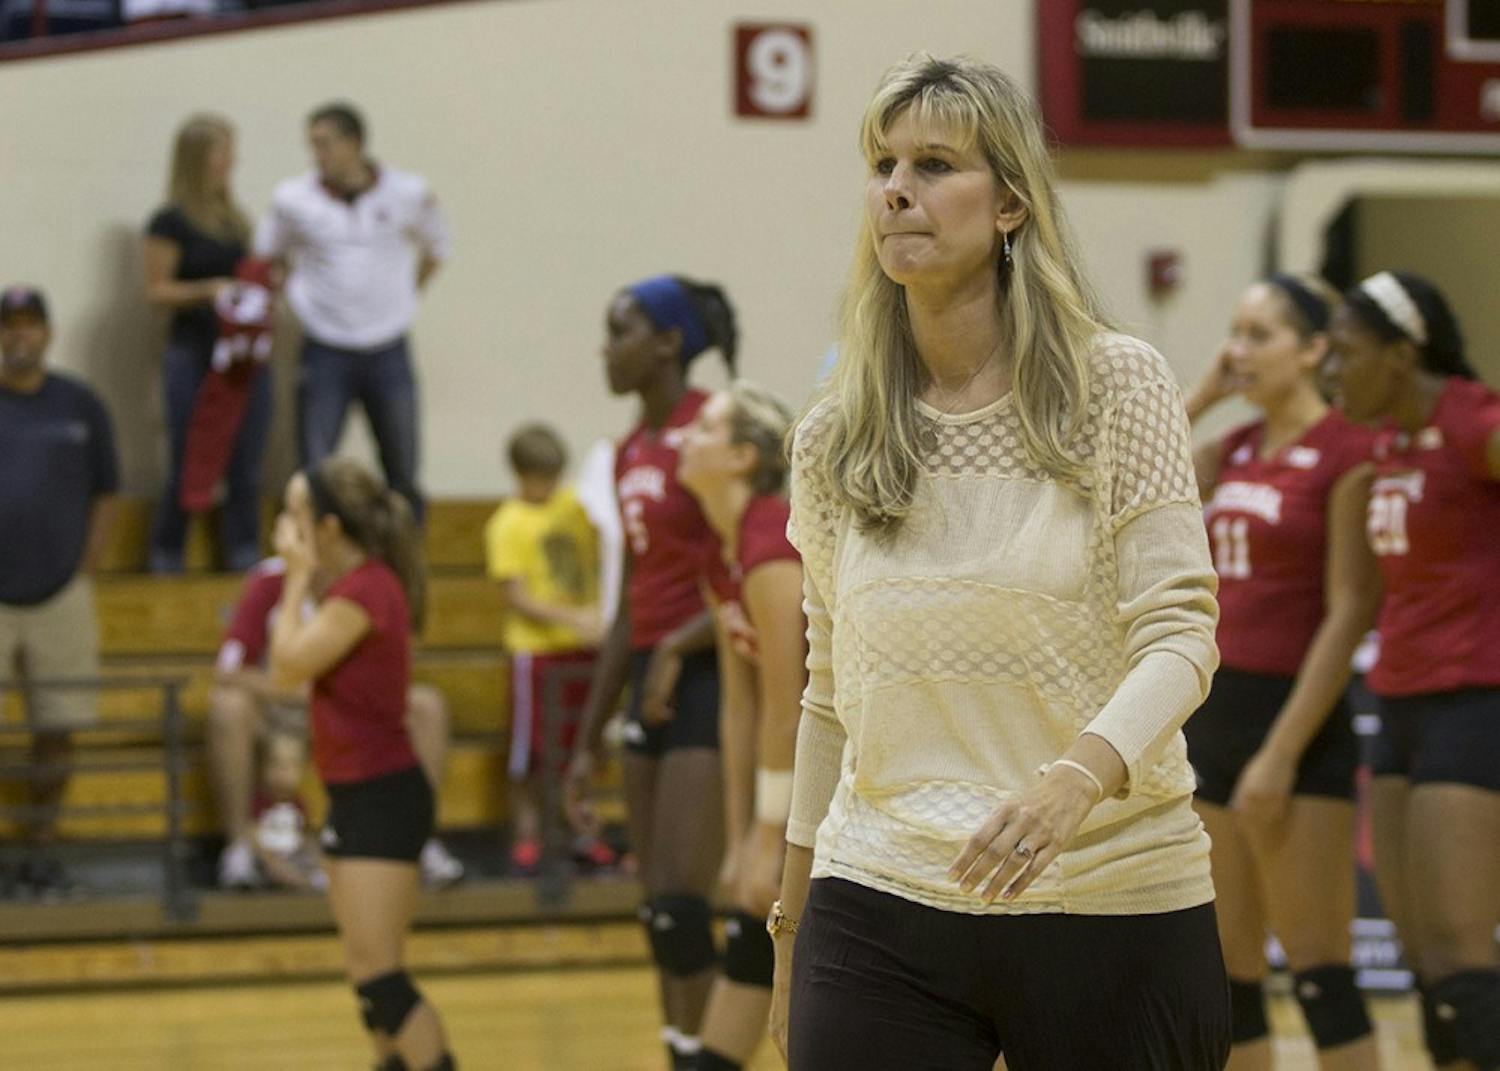 Former IU volleyball Coach Sherry Dunbar-Kruzan walks to greet the Southeast Missouri State University head coach before the Indiana Invitational in 2014 at Assembly Hall. Dunbar-Kruzan's contract will not be renewed after coaching 11 seasons at IU.